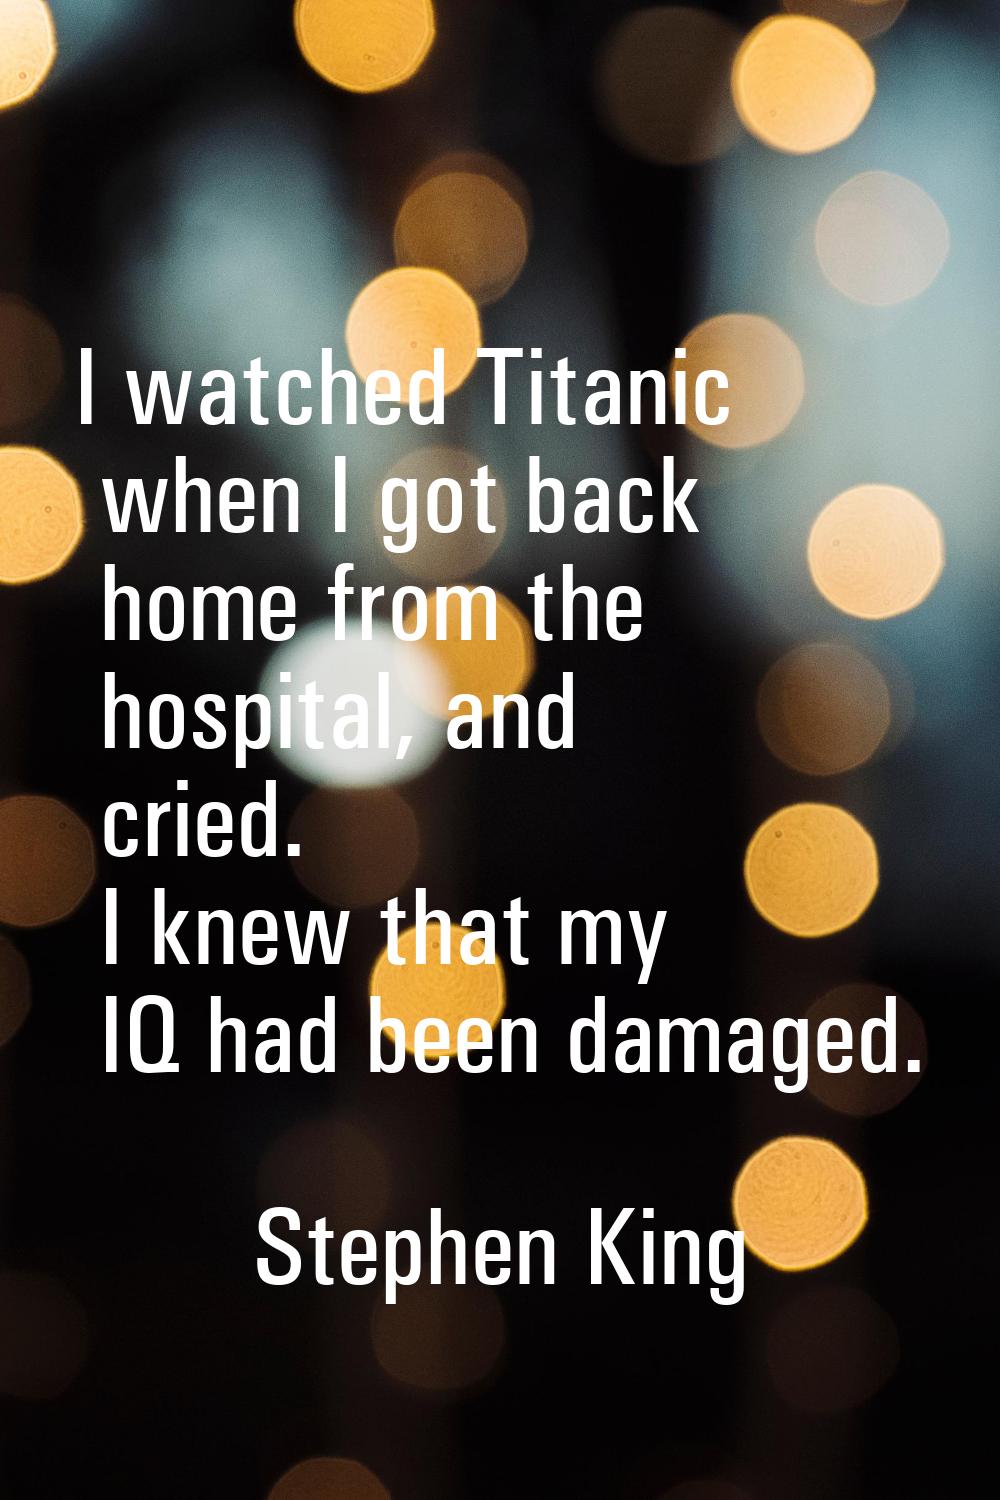 I watched Titanic when I got back home from the hospital, and cried. I knew that my IQ had been dam